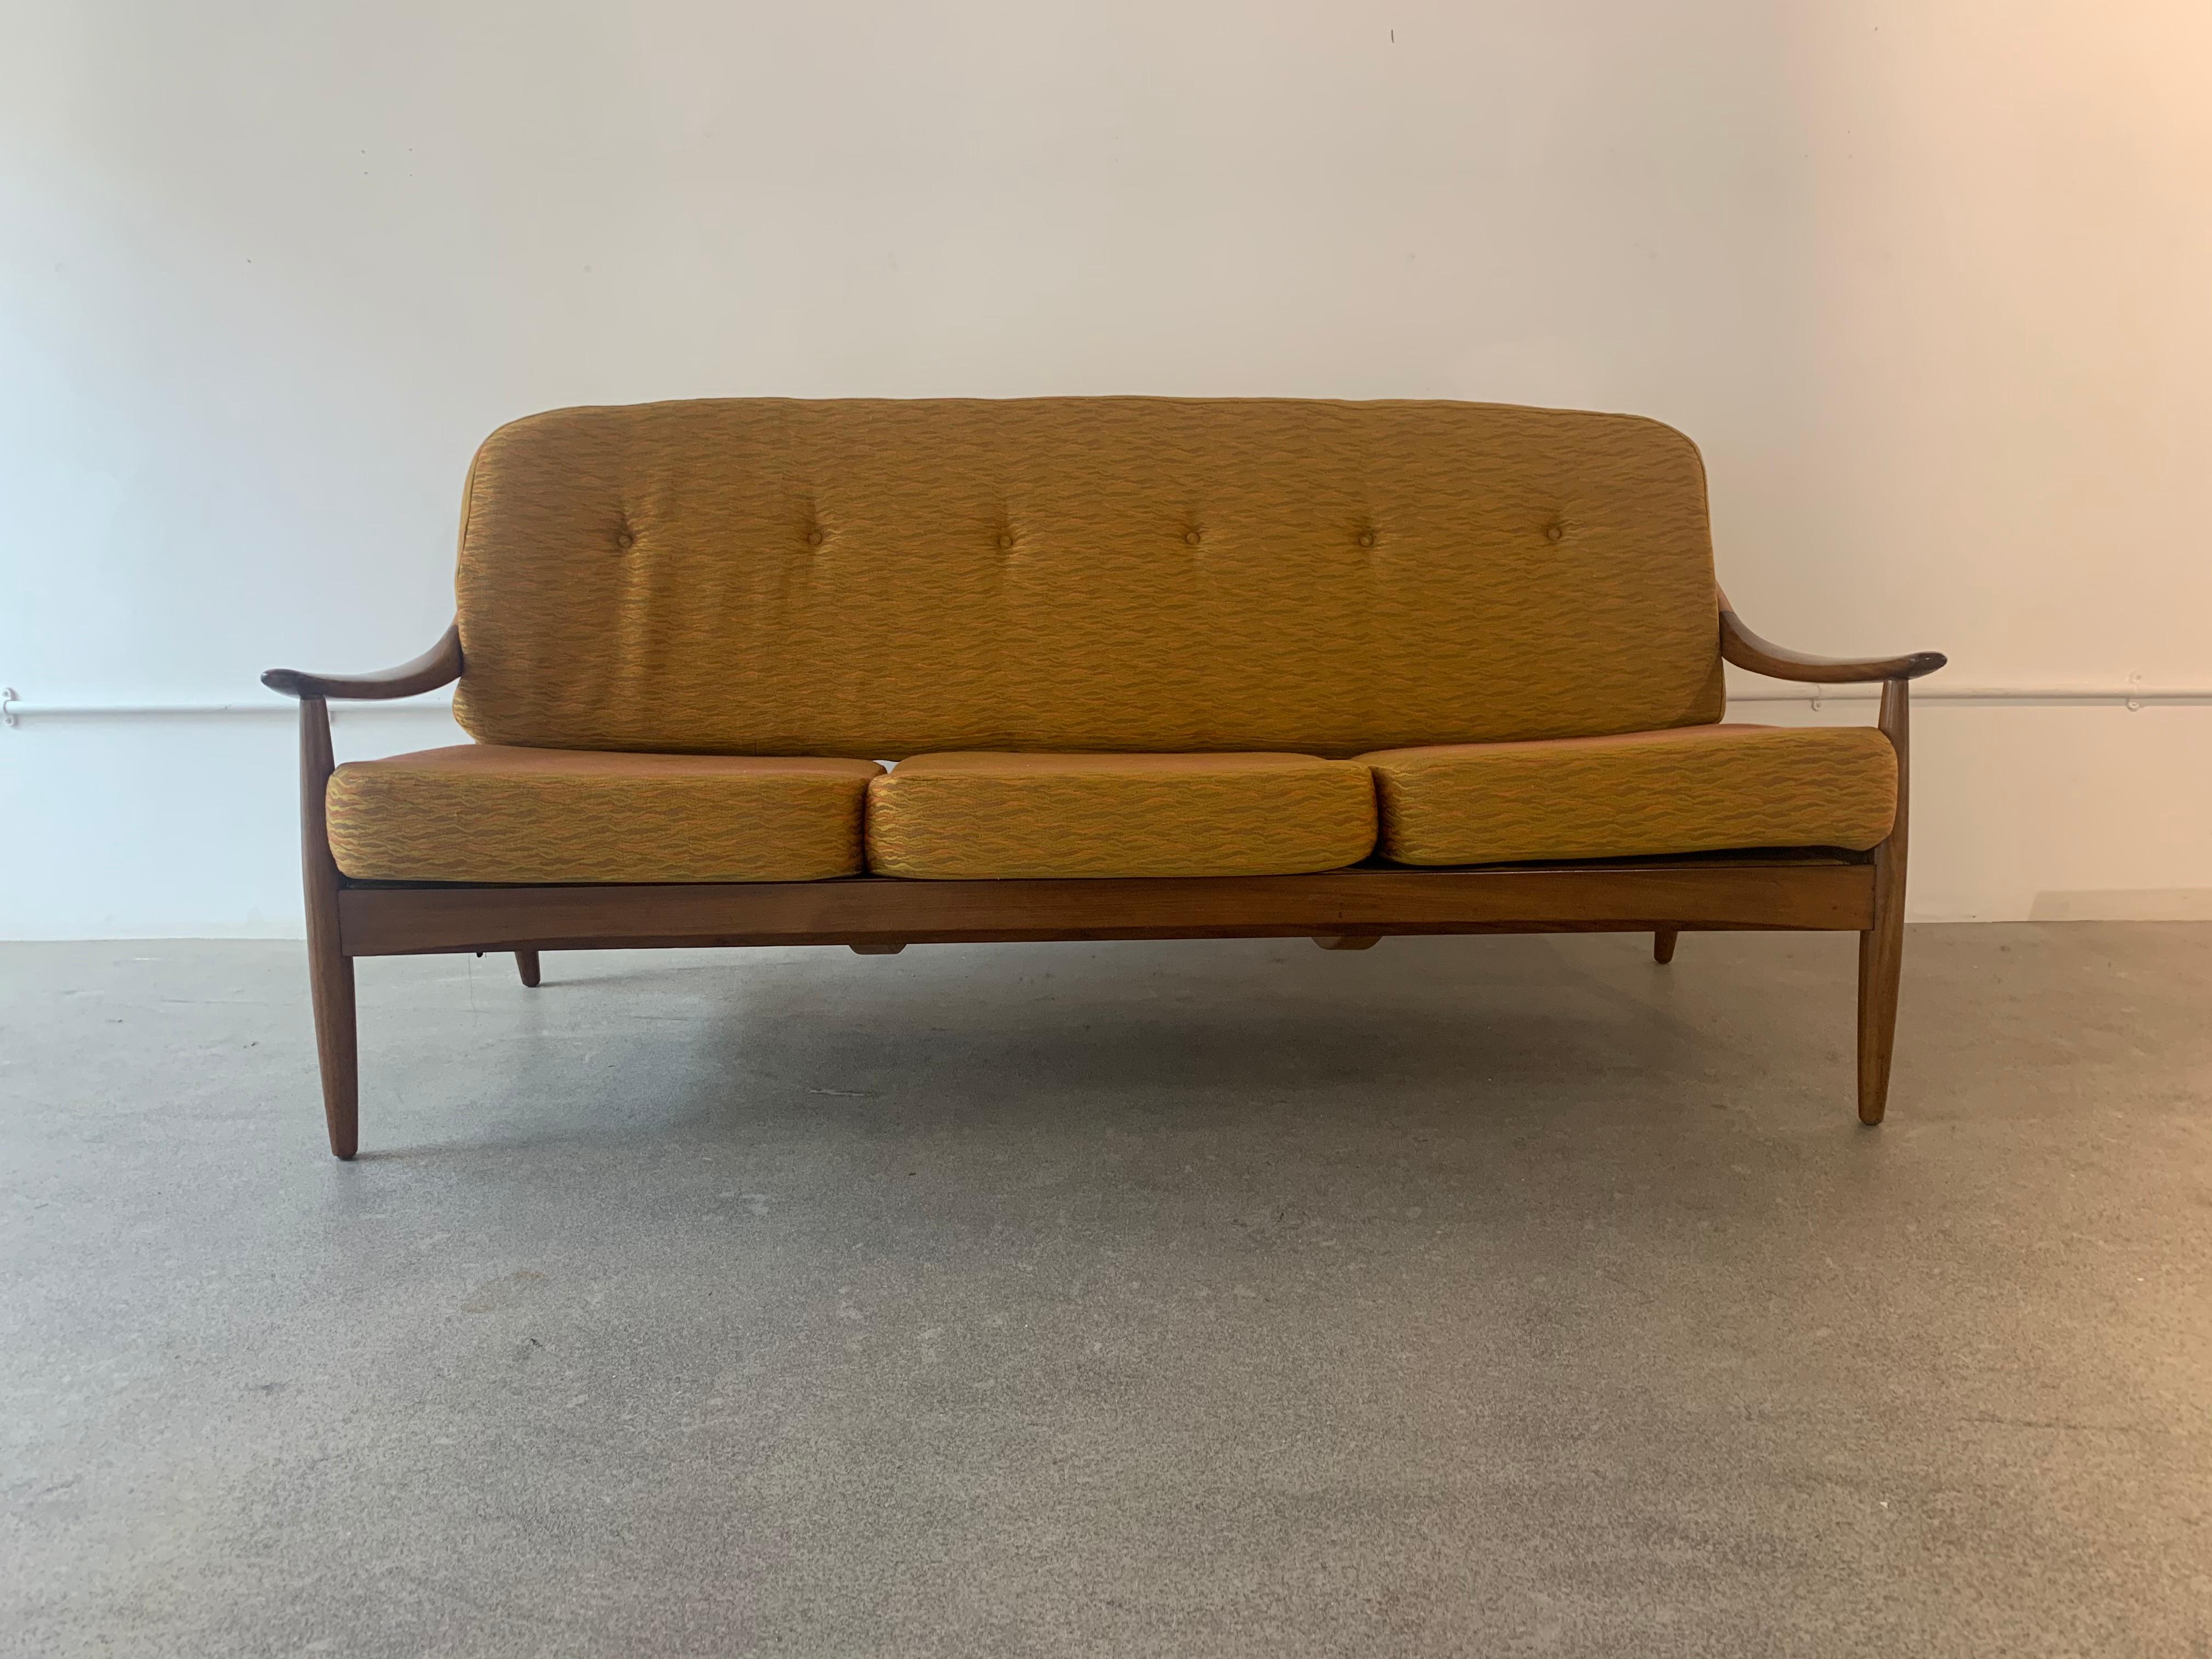 1960s Greaves and Thomas teak bentwood sofa. The sofa is formed from steam bent solid teak with curved sweeping armrests, a spindle back with turned, tapered, flared legs. The seat and buttoned back cushion are upholstered in a flame orange and gold